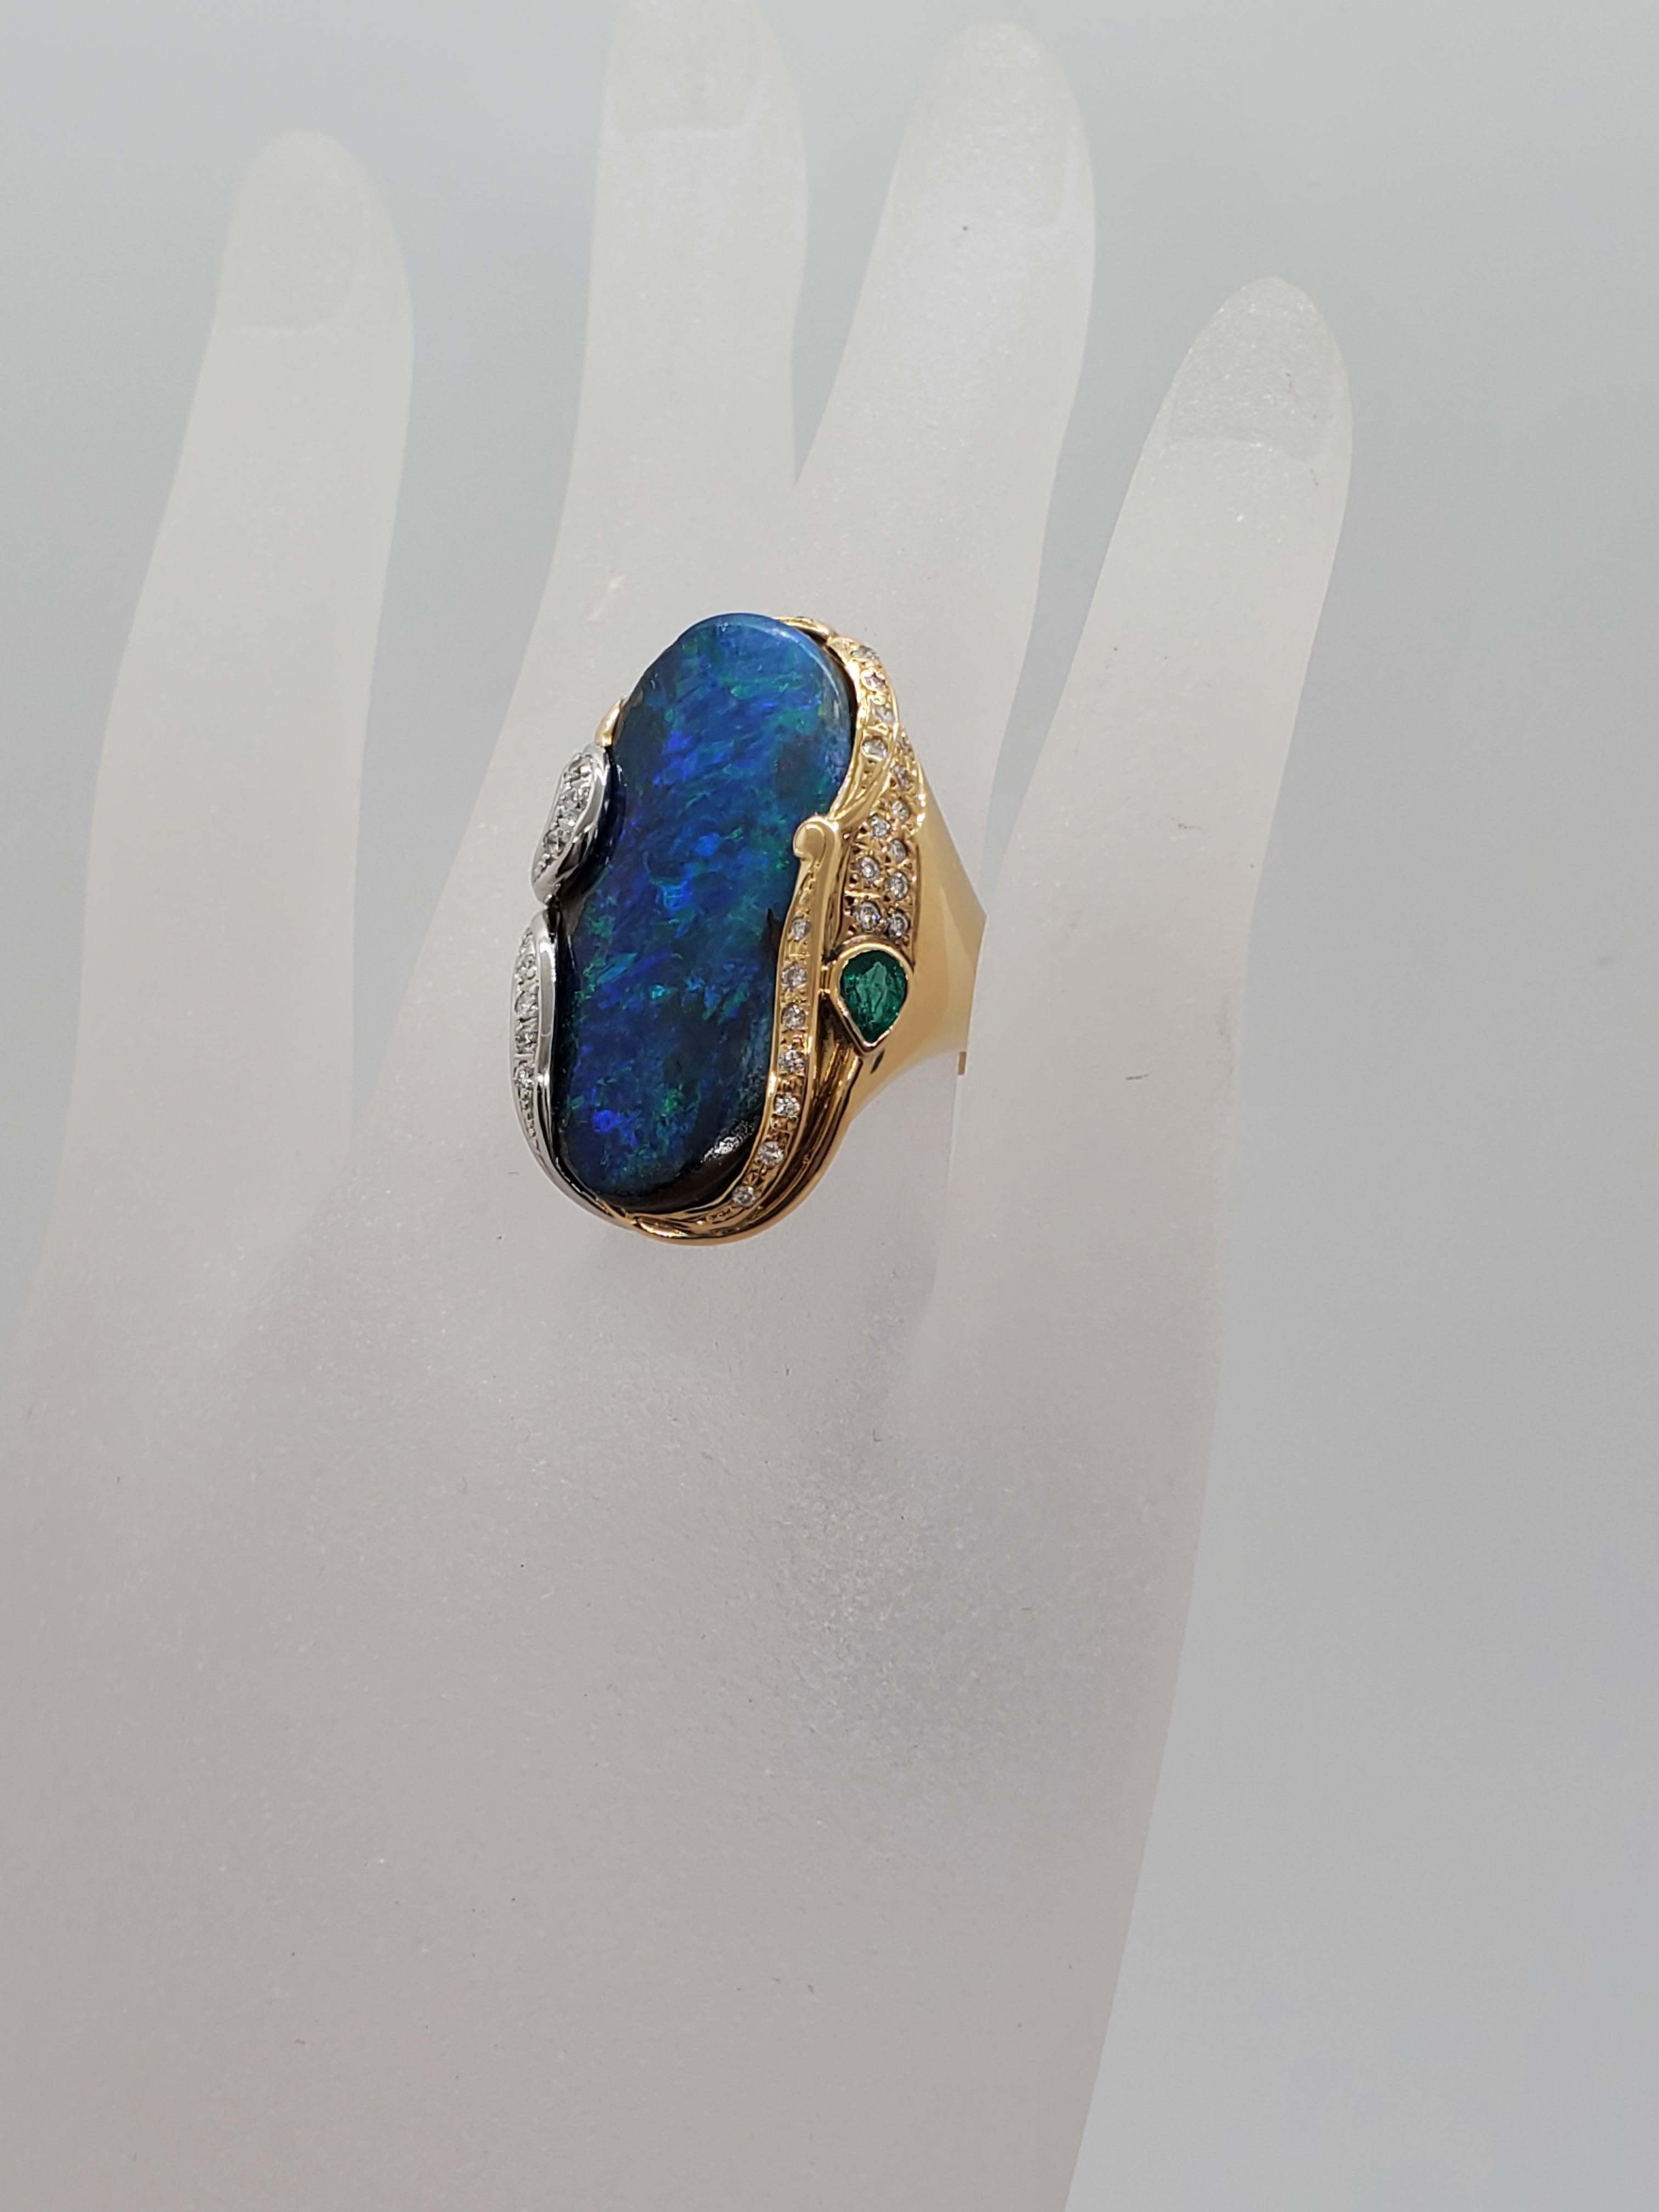 Spectacular estate boulder opal ring featuring a 22.10 ct gorgeous green blue opal and 0.59 cts of emerald pear shape and white diamond rounds.  Handcrafted in 18k white and yellow gold. Excellent condition.  